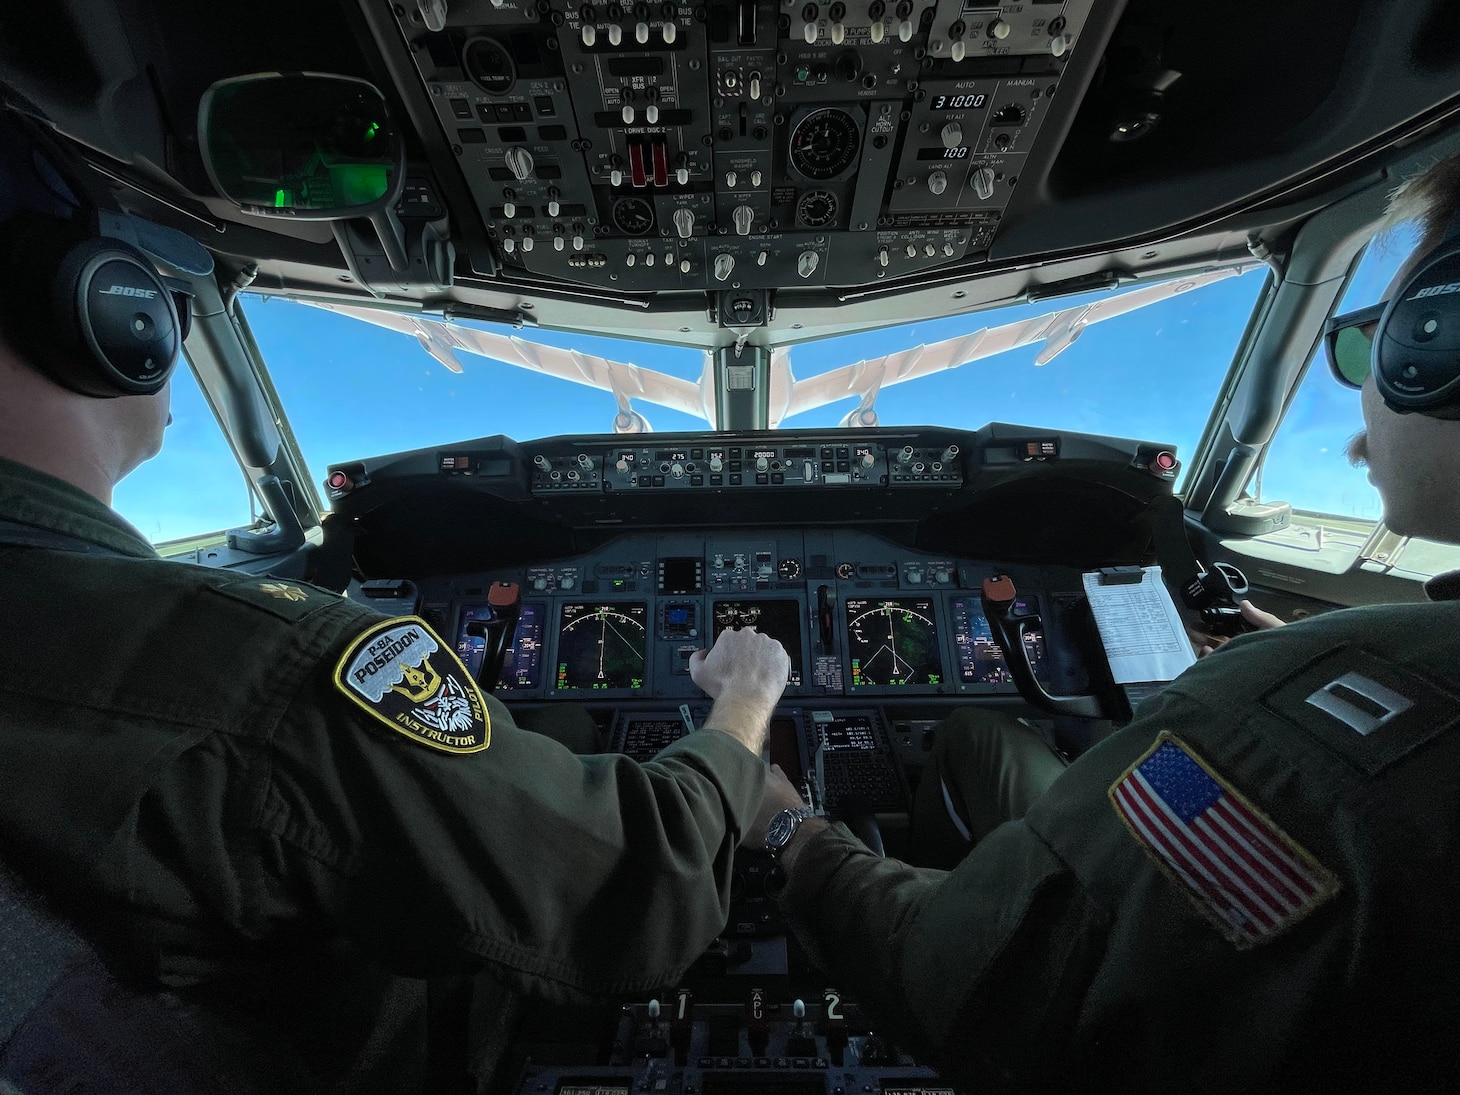 Pilots Lt. Cmdr. Mark Lascara and Lt. Thomas Coffin observe Royal Australian Air Force (RAAF) KC-30A Air to Air Refueling their U.S. Navy (USN) P-8A during an evolution for the Royal Australian Navy Fleet Certification Period. This was the first ever evolution between a RAAF KC-30A and a USN P-8A in an operational setting. VP-47 conducts maritime patrol and reconnaissance as well as theater outreach operations as part of a rotational deployment to the U.S. 7th Fleet area of operations.